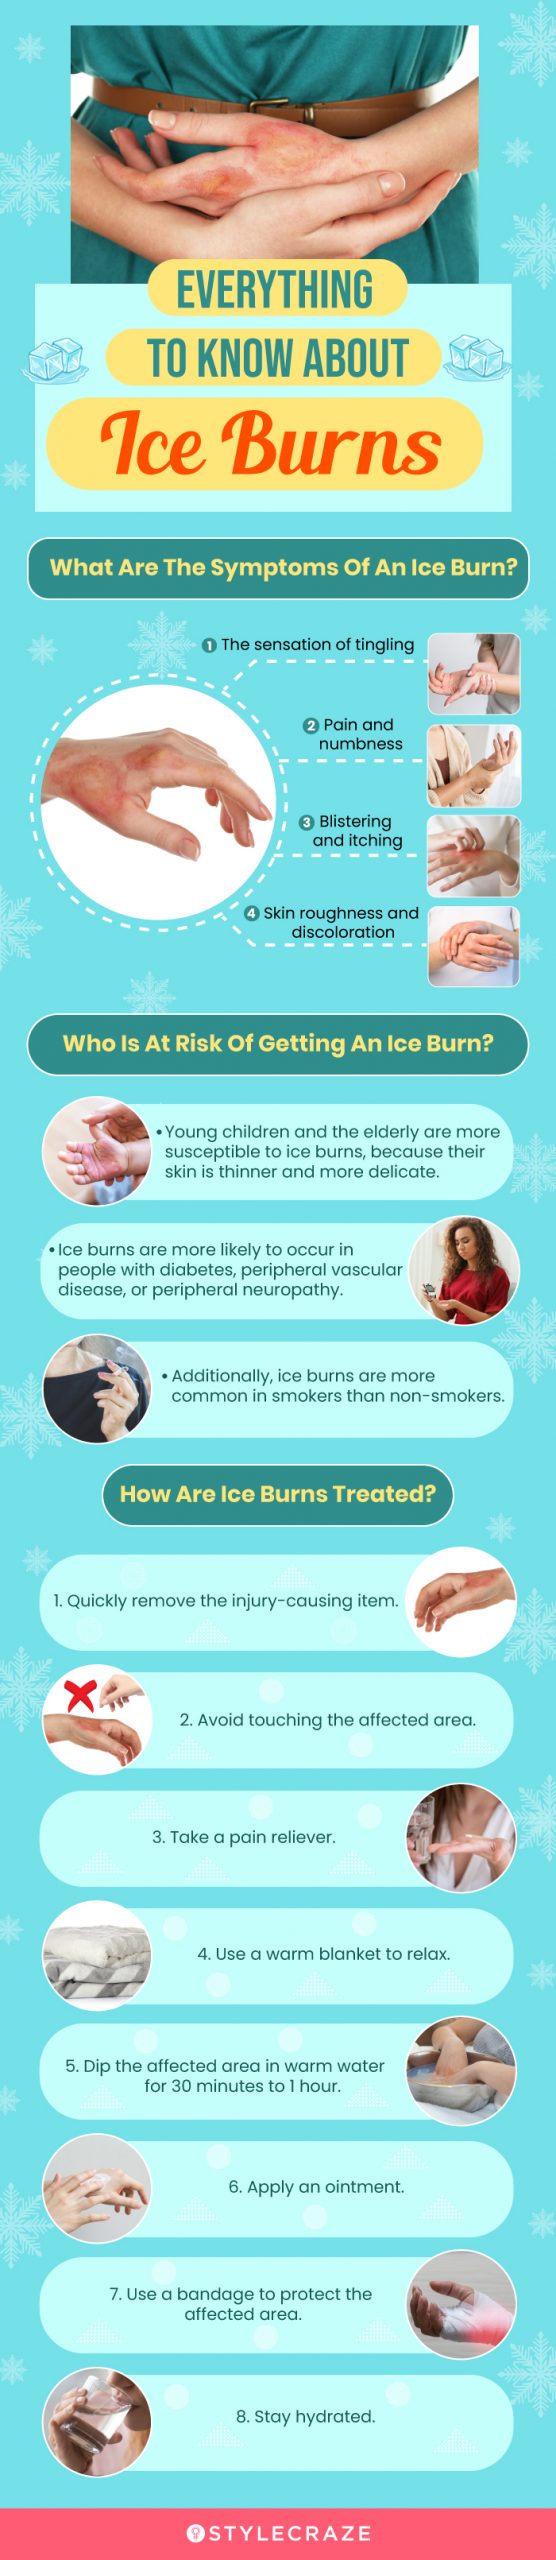 everything to know about ice burns (infographic)